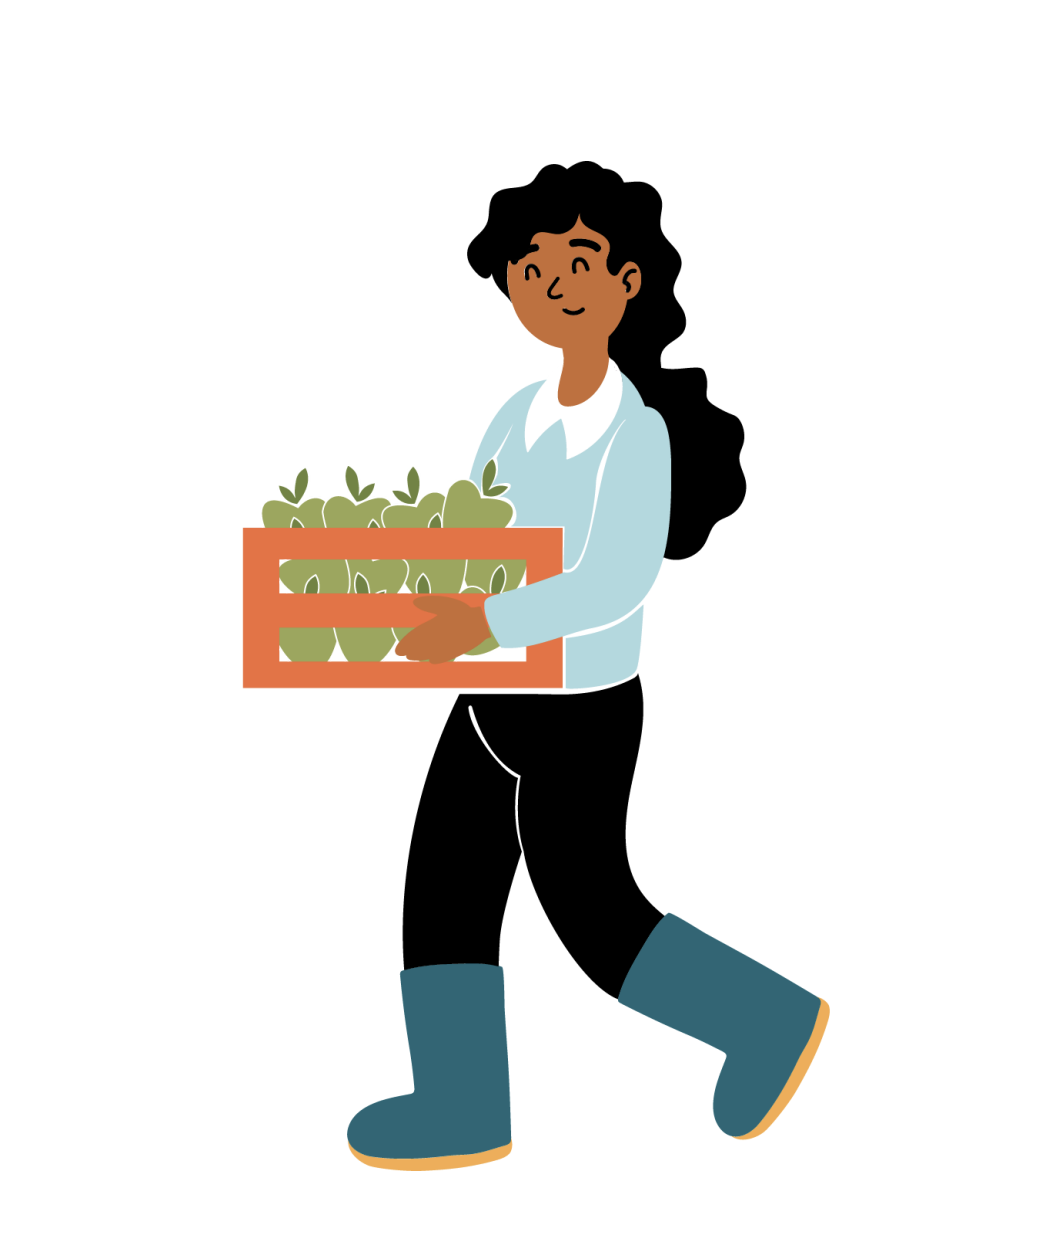 A person in boots walks carrying a crate of veggies